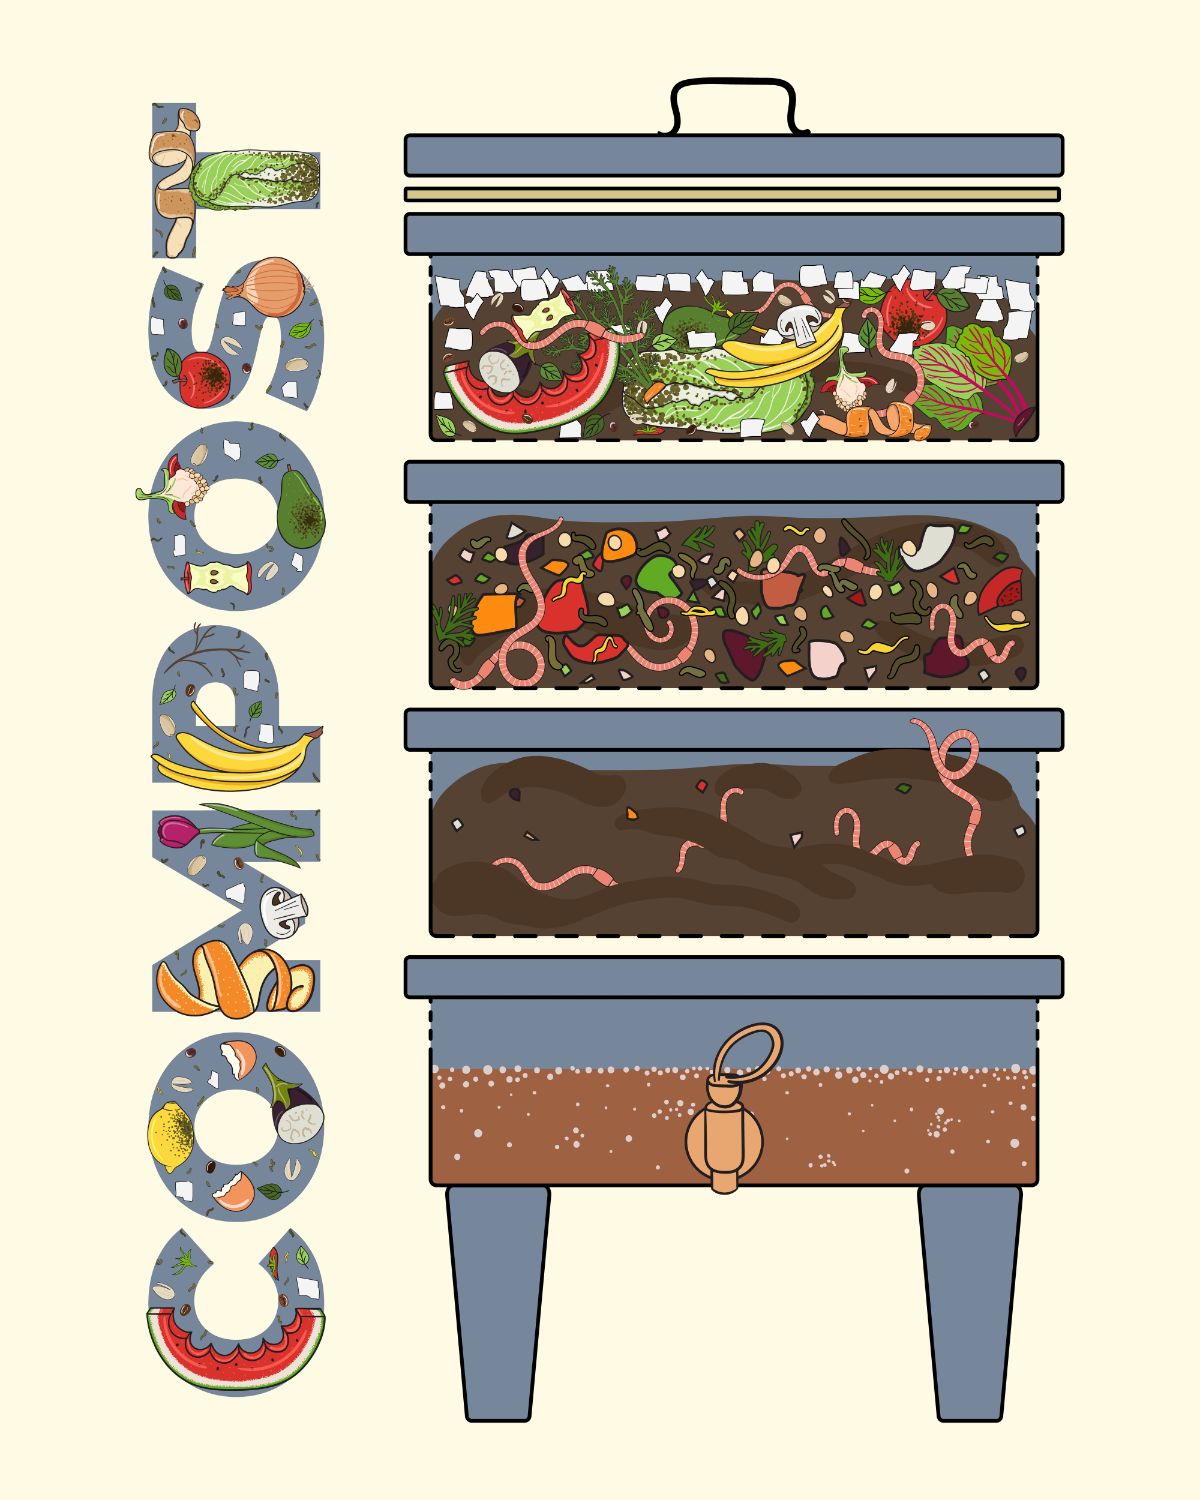 Graphic showing the layers of a worm bin composting system